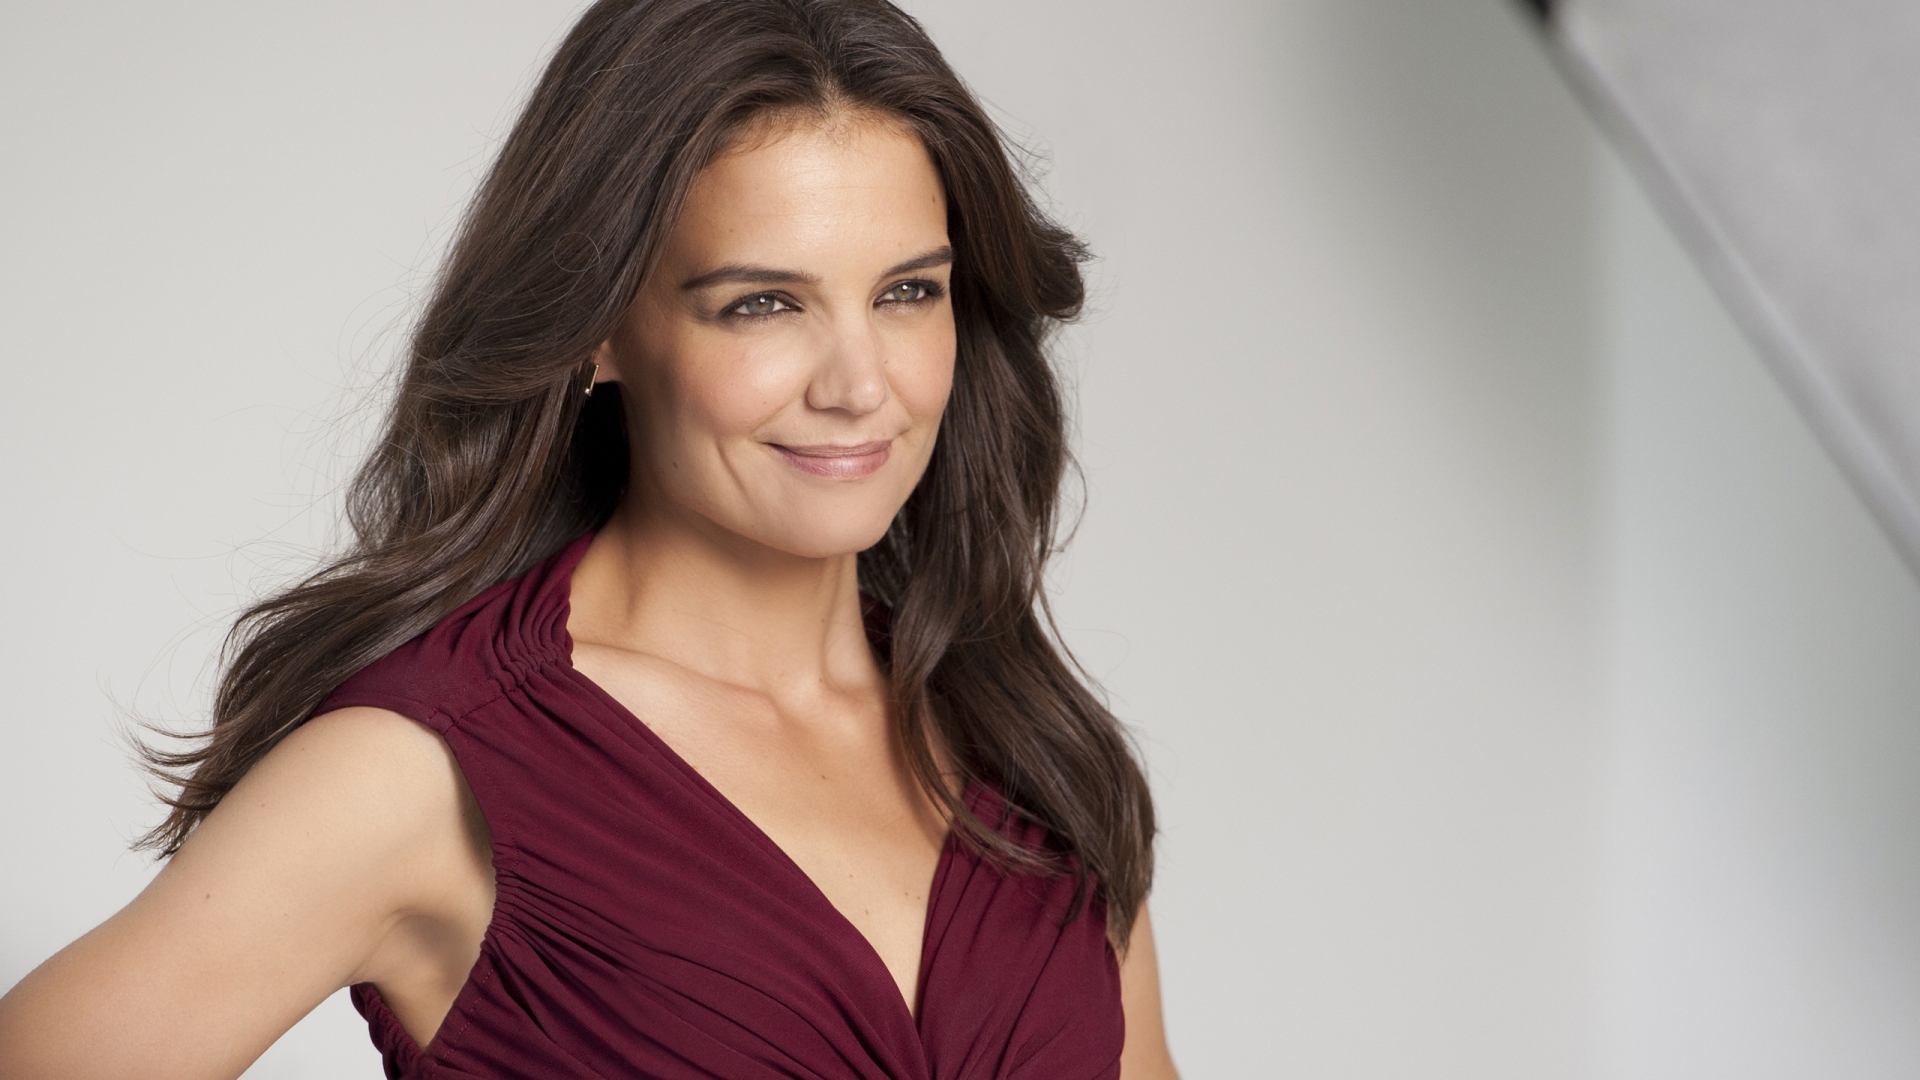 Katie Holmes Wow for 1920 x 1080 HDTV 1080p resolution